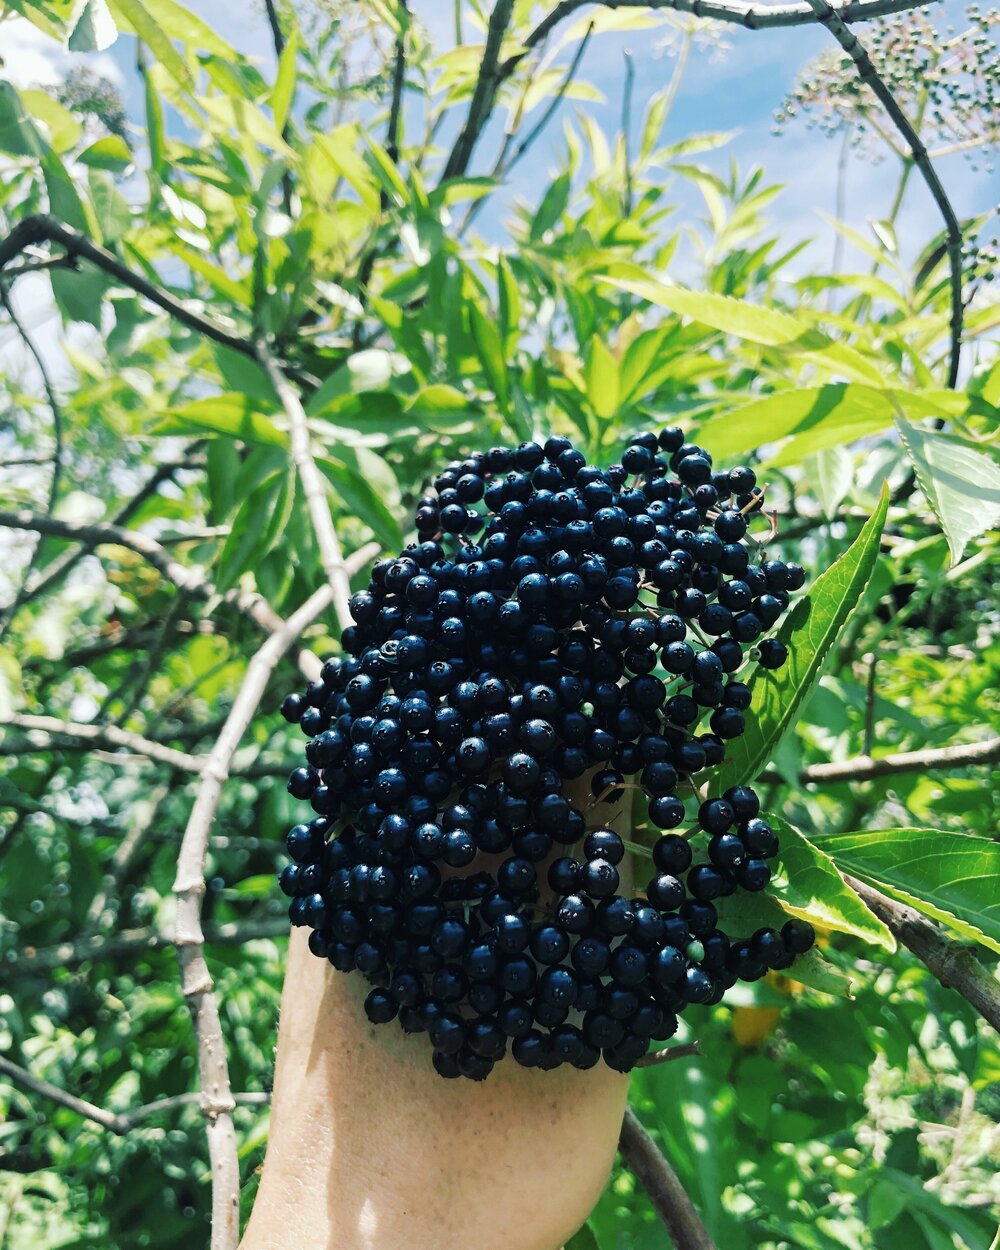 Meg’s hand full of dark blue berries, collected for Flora Wellness products  photo credit Flora Wellness.